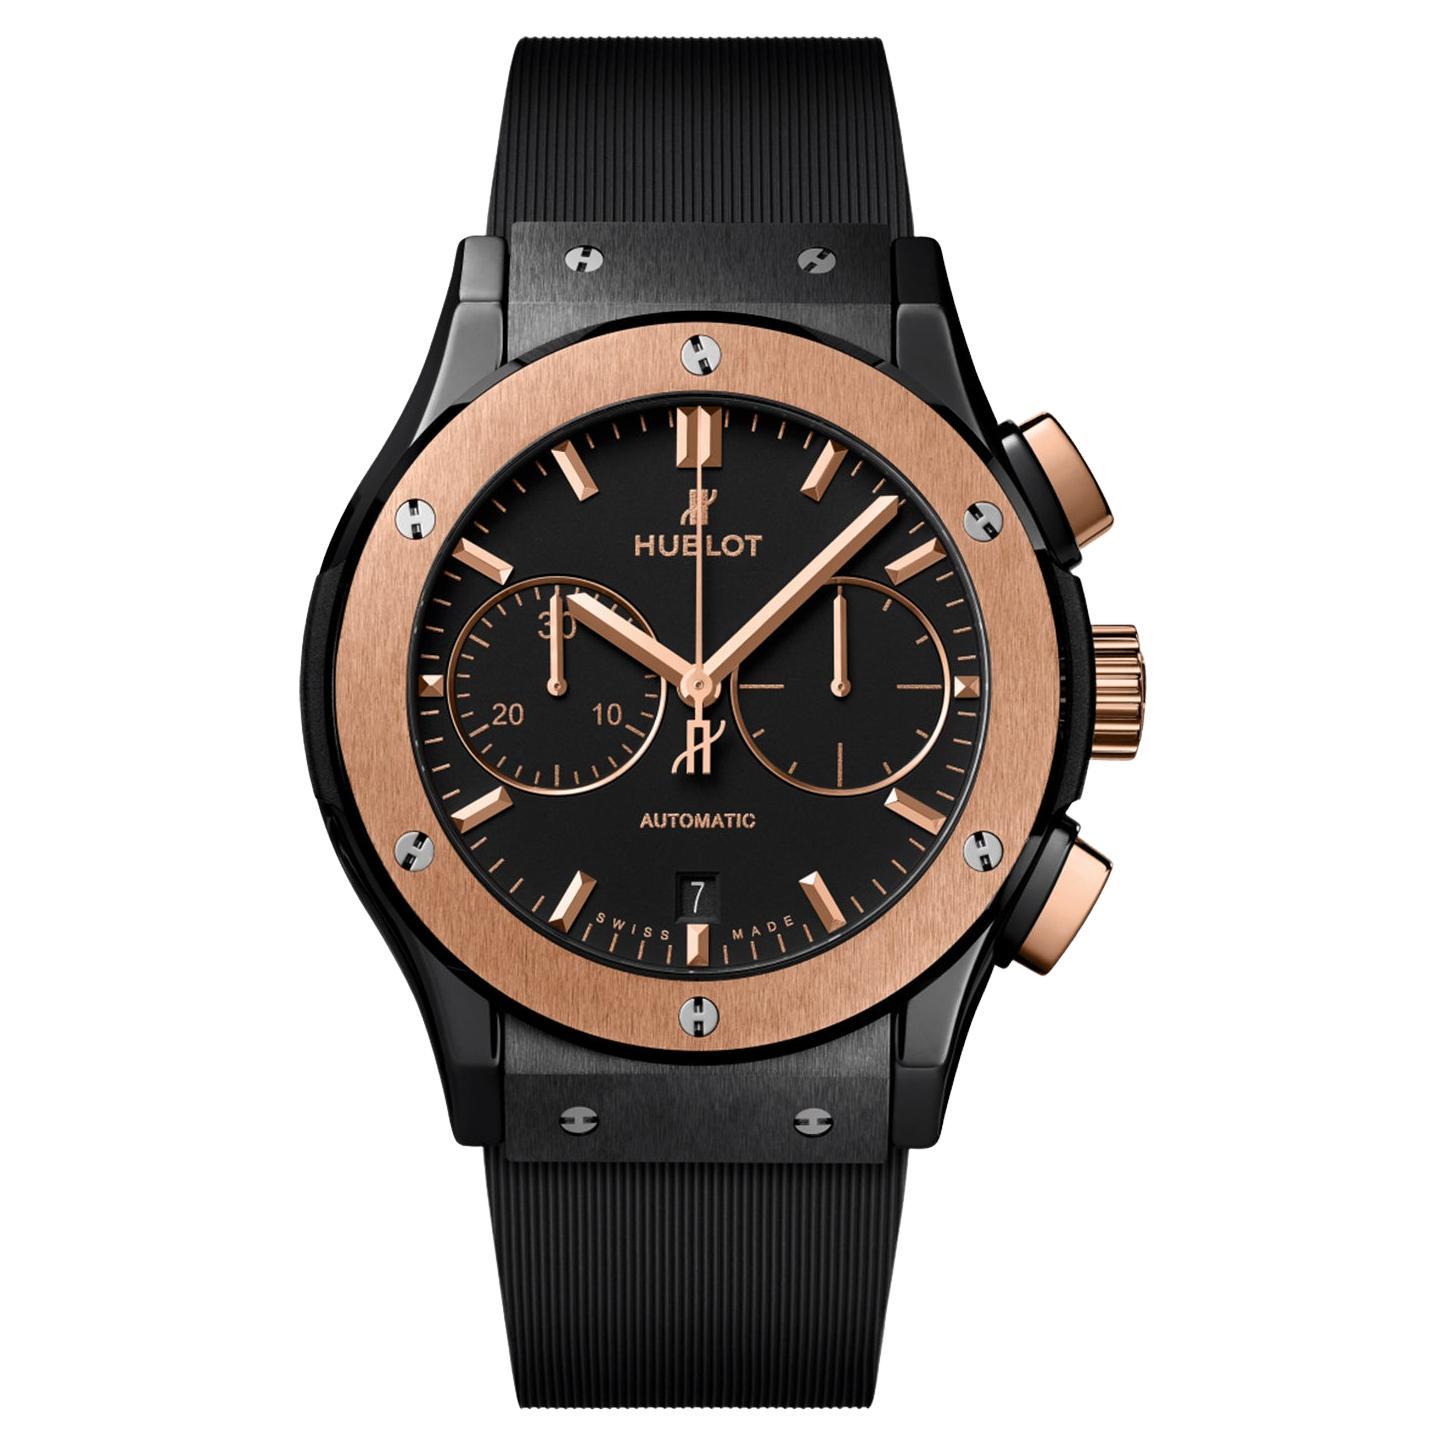 Hublot Classic Fusion Chronograph Ceramic King Gold 45mm Watch 521.CO.1181.RX For Sale